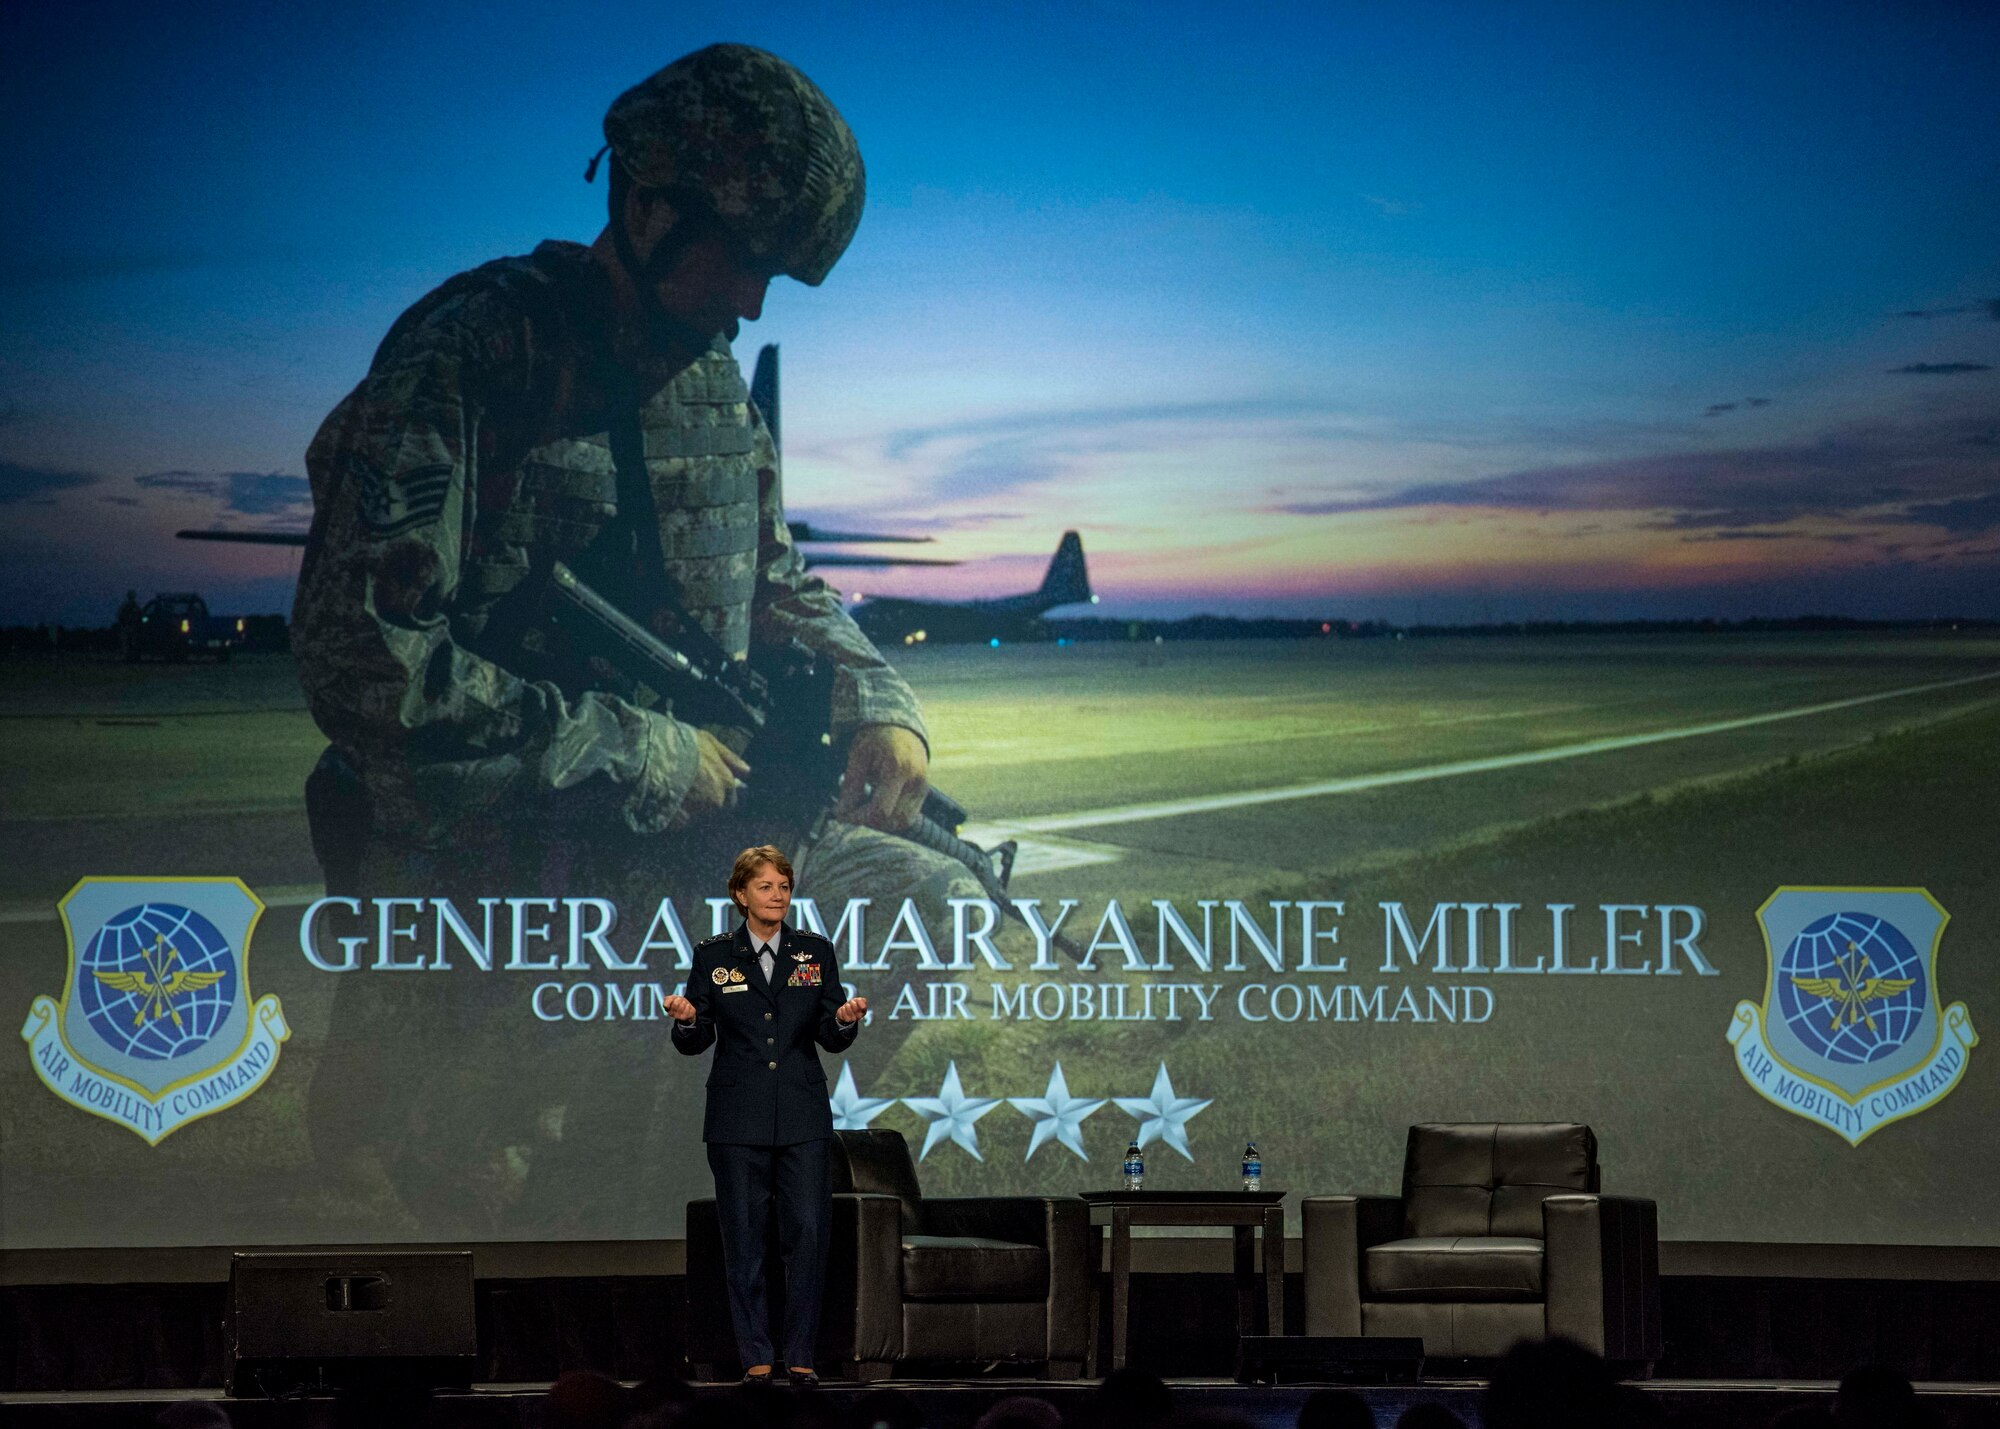 Gen. Maryanne Miller, Air Mobility Command commander, speaks during the Airlift/Tanker Association Symposium in Grapevine, Texas, Oct. 27, 2018. "As Airmen, we succeed," said Miller. "As Airmen, we invest in serving this great nation and each other. As Airmen, we lead from the
front, kneel by those in need, share in the work of our teammates, respect their lives and honor their contributions." A/TA, AMC's premier professional  development event, provides mobility Airmen an opportunity to learn about and discuss mobility priorities, issues, challenges, and successes. The venue creates dialogue between industry experts and Air Force and Department of Defense about ways to innovate, enhance mission effects and advance readiness headed into the future.  (U.S. Air Force photo by Tech. Sgt. Jodi Martinez)